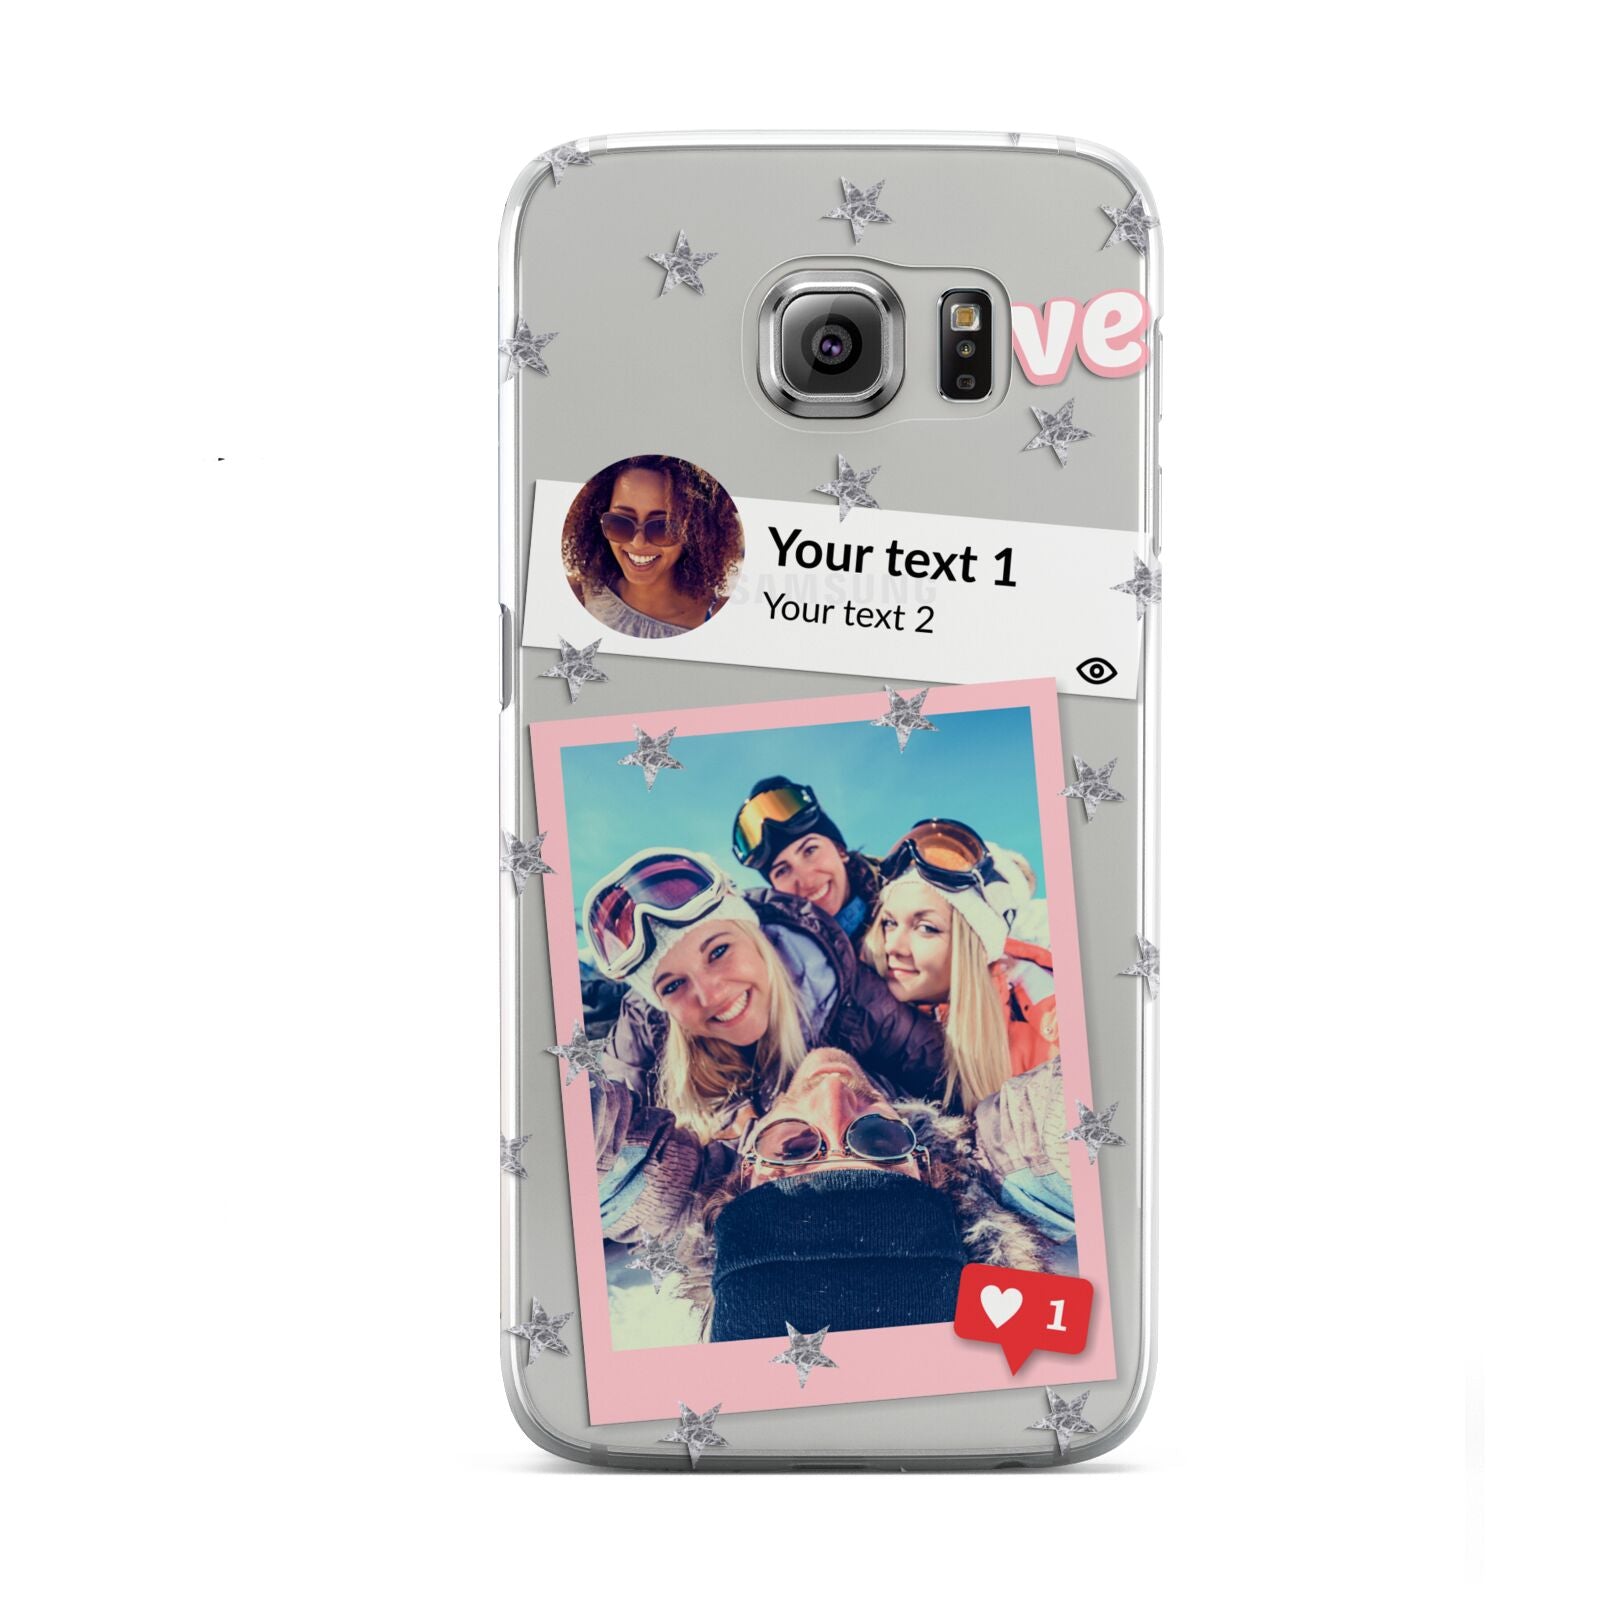 Starry Social Media Photo Montage Upload with Text Samsung Galaxy S6 Case